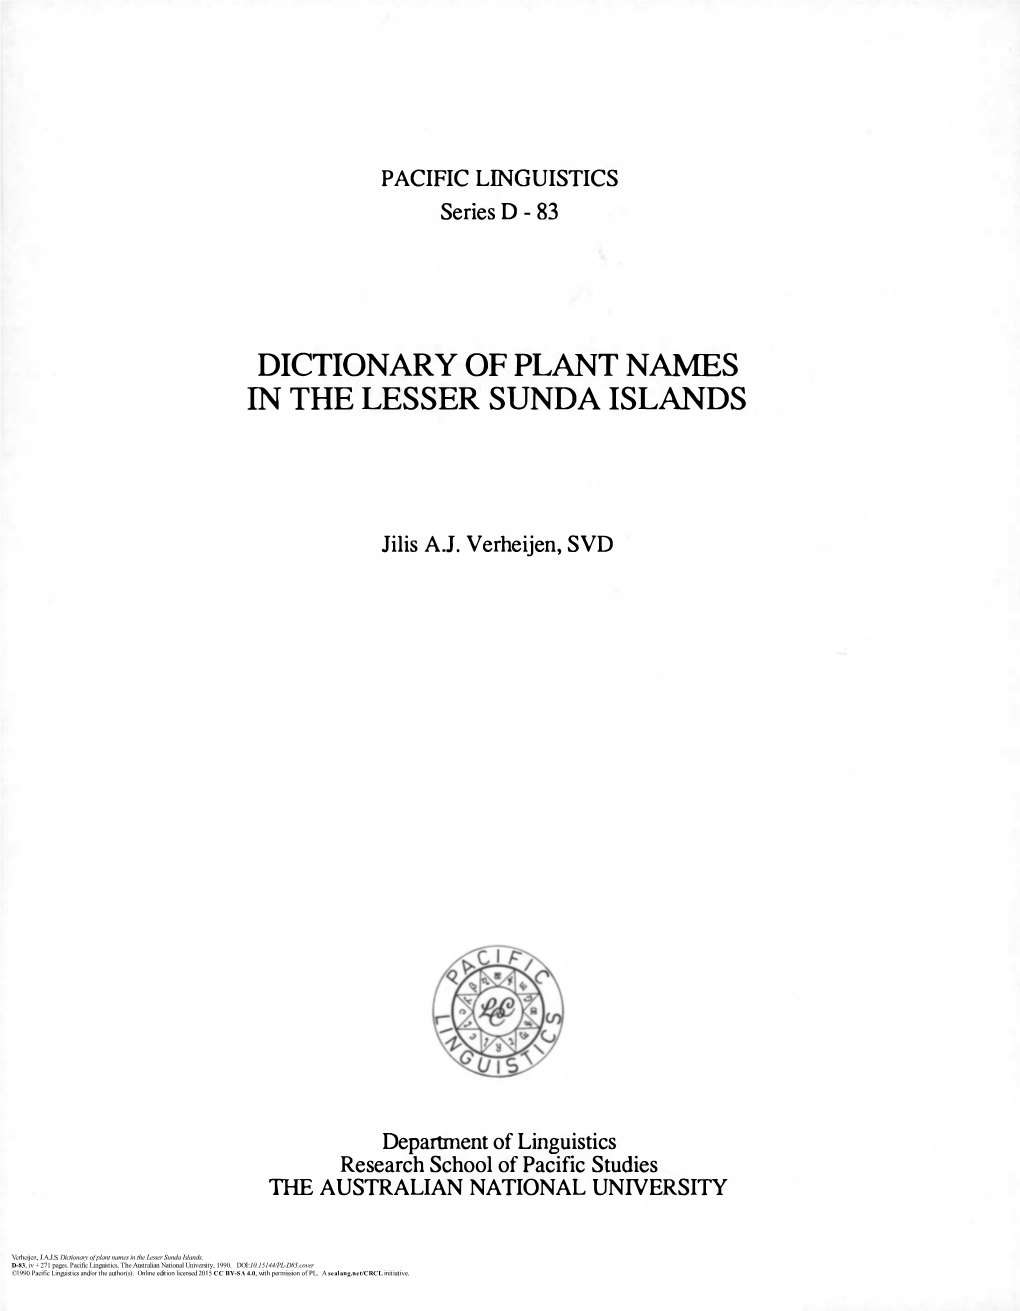 Dictionary of Plant Names in the Lesser Sunda Islands